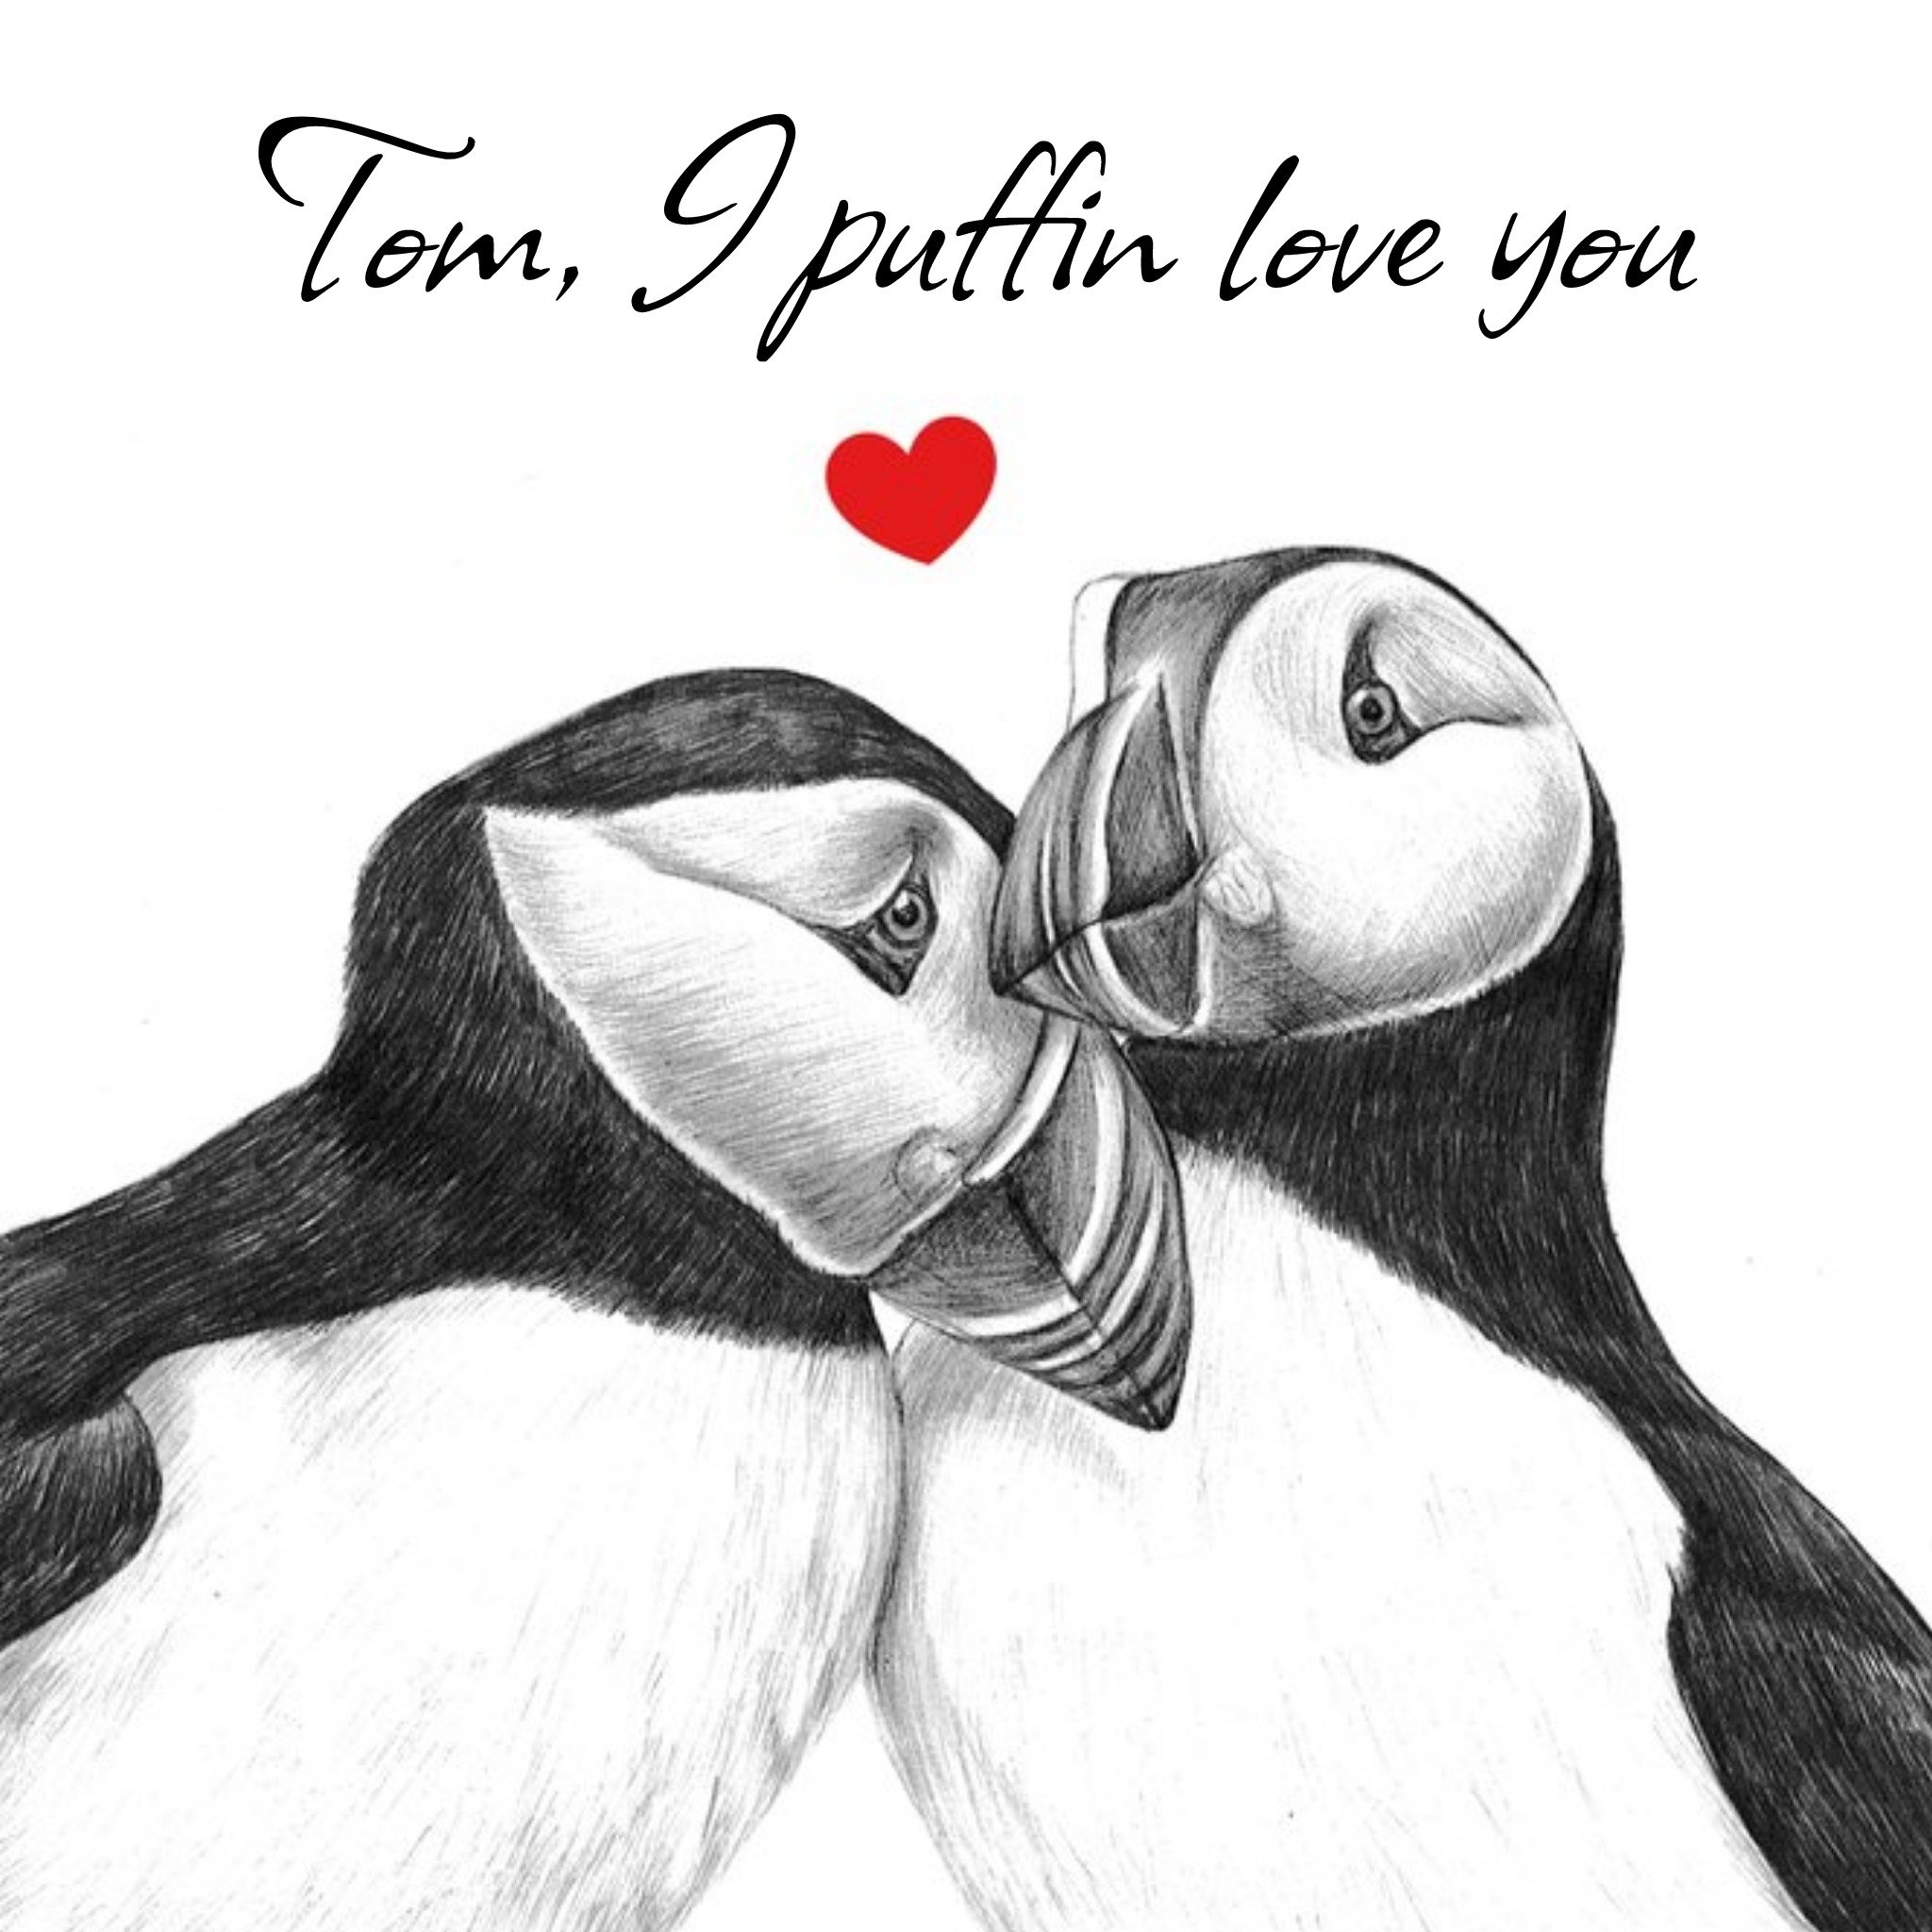 Moonpig Cute Illustrated I Puffin Love You Valentine's Day Card, Large